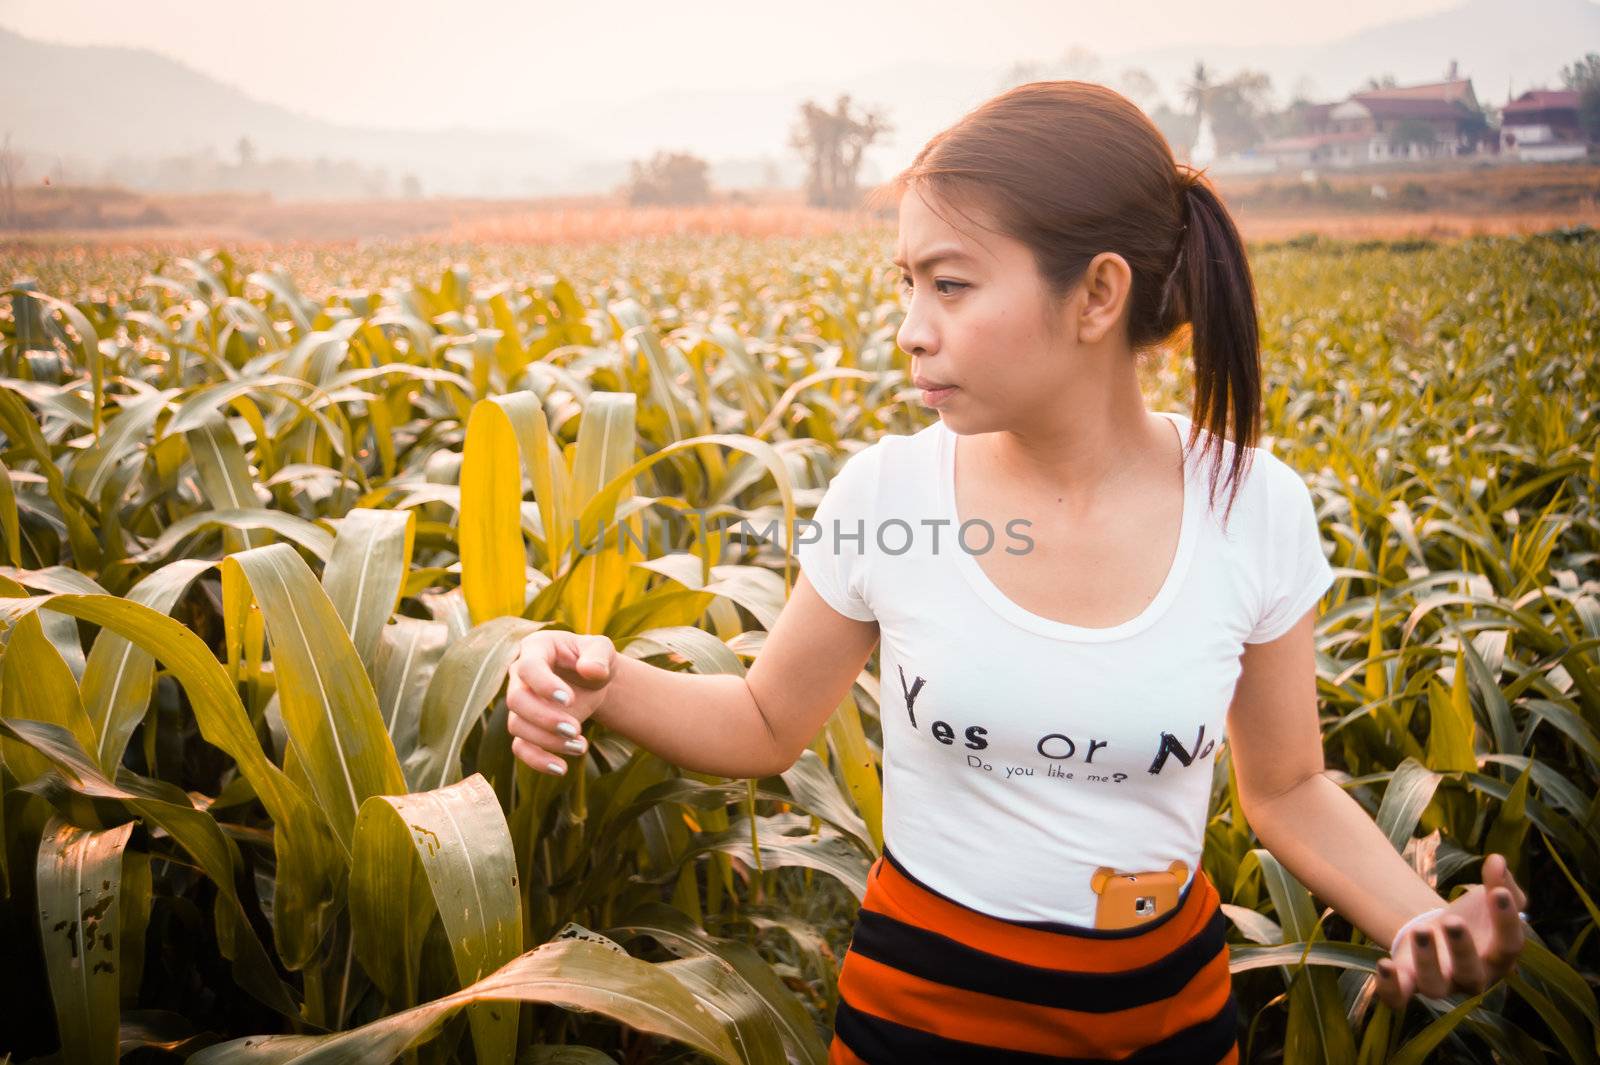 woman in field with sunlight by moggara12